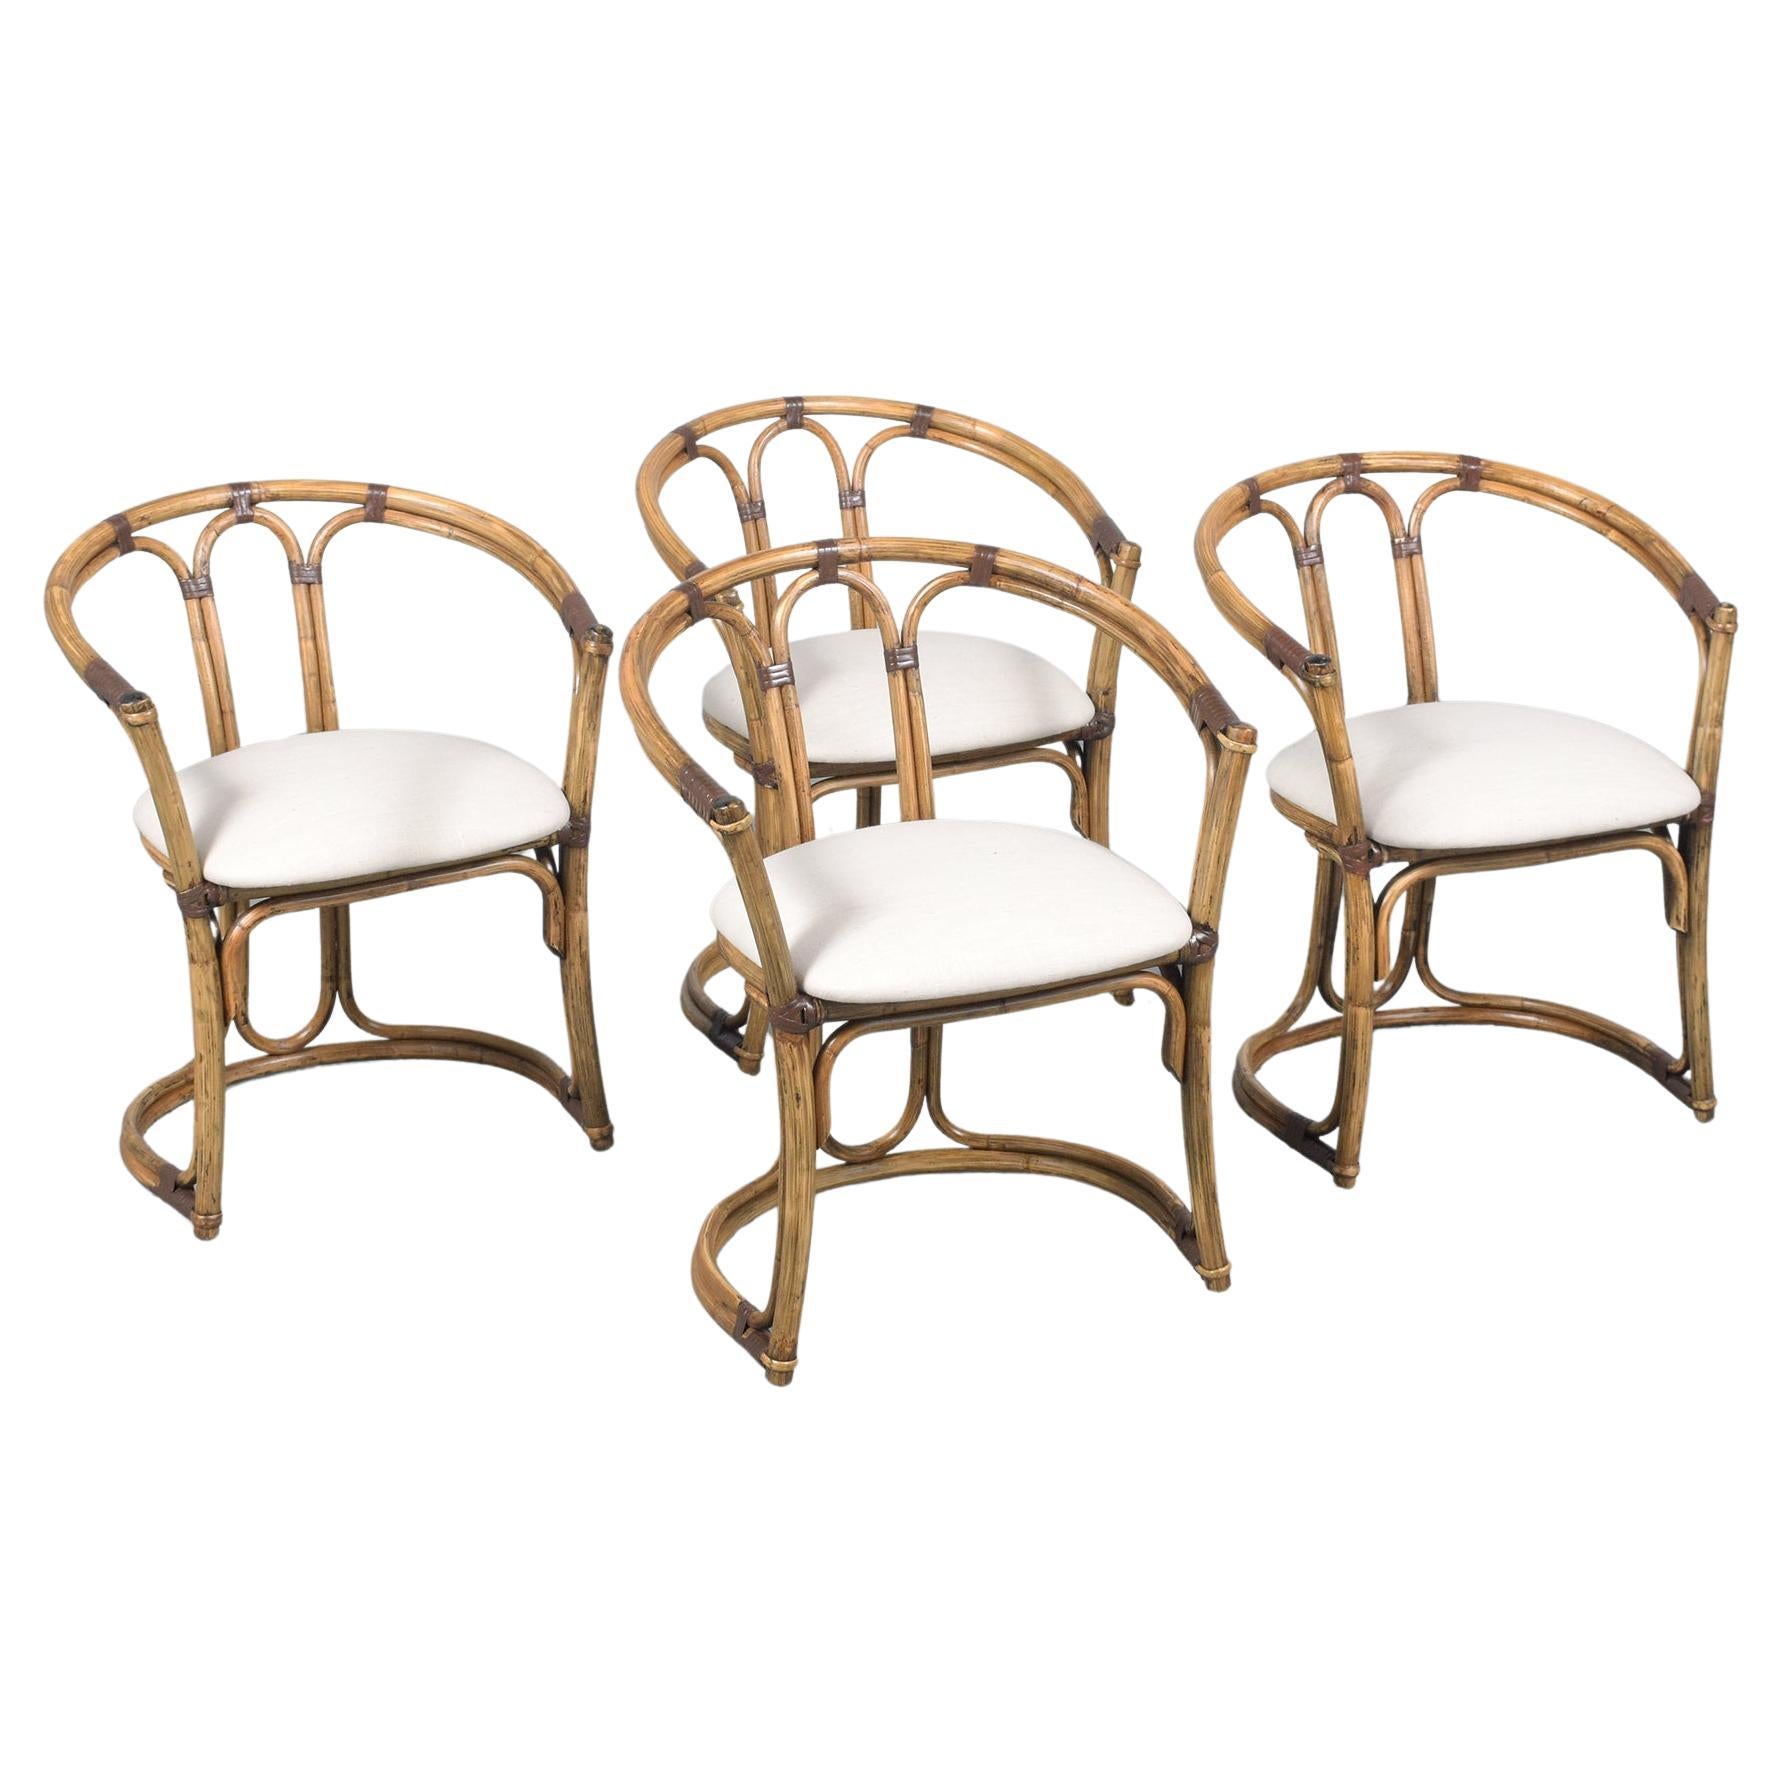 Restored Vintage Bamboo Barrel Armchairs - Set of Four For Sale